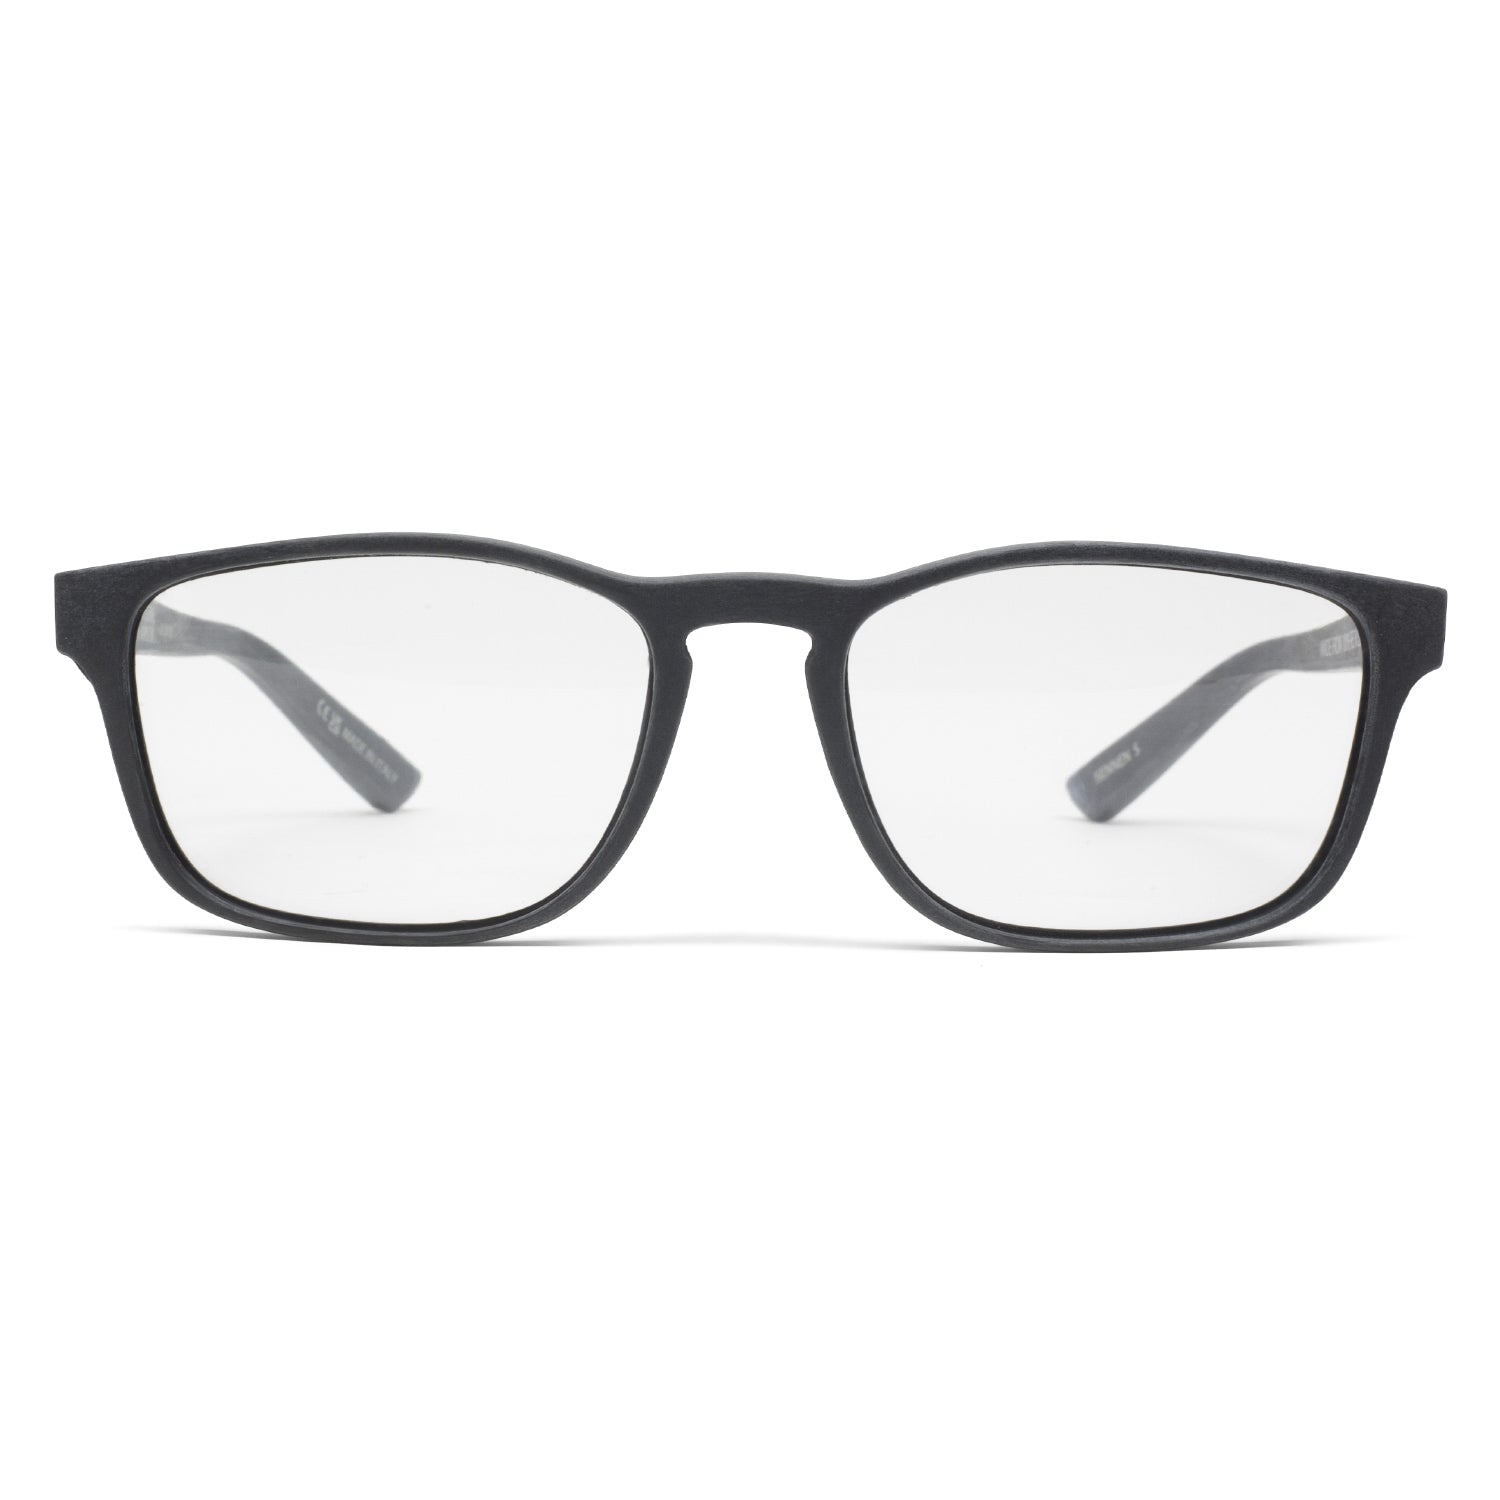 Sustainable Prescription Glasses, Recycled Optical Frames